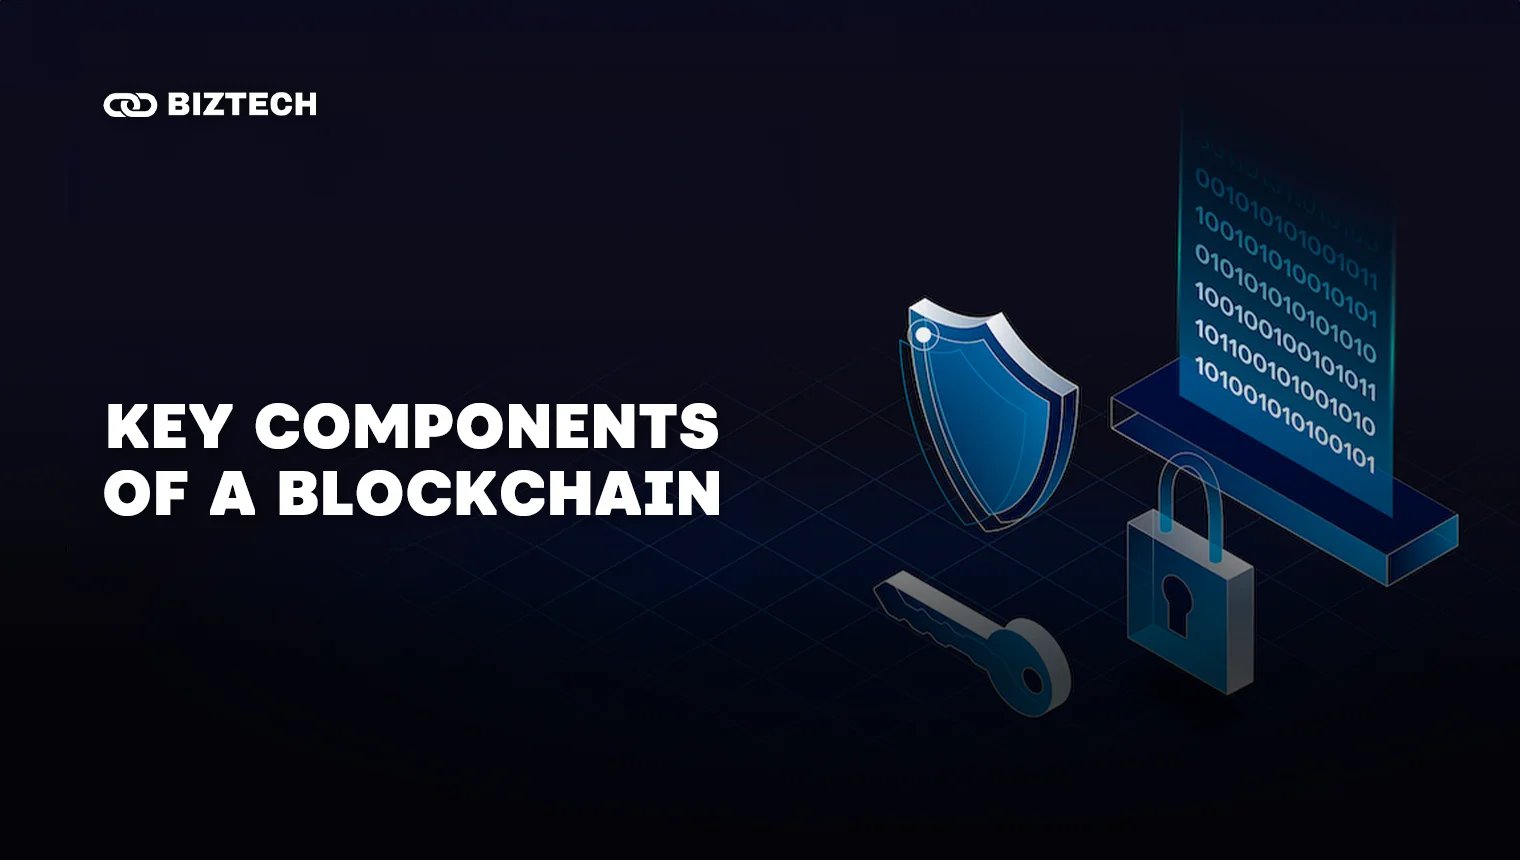 Key components of a blockchain